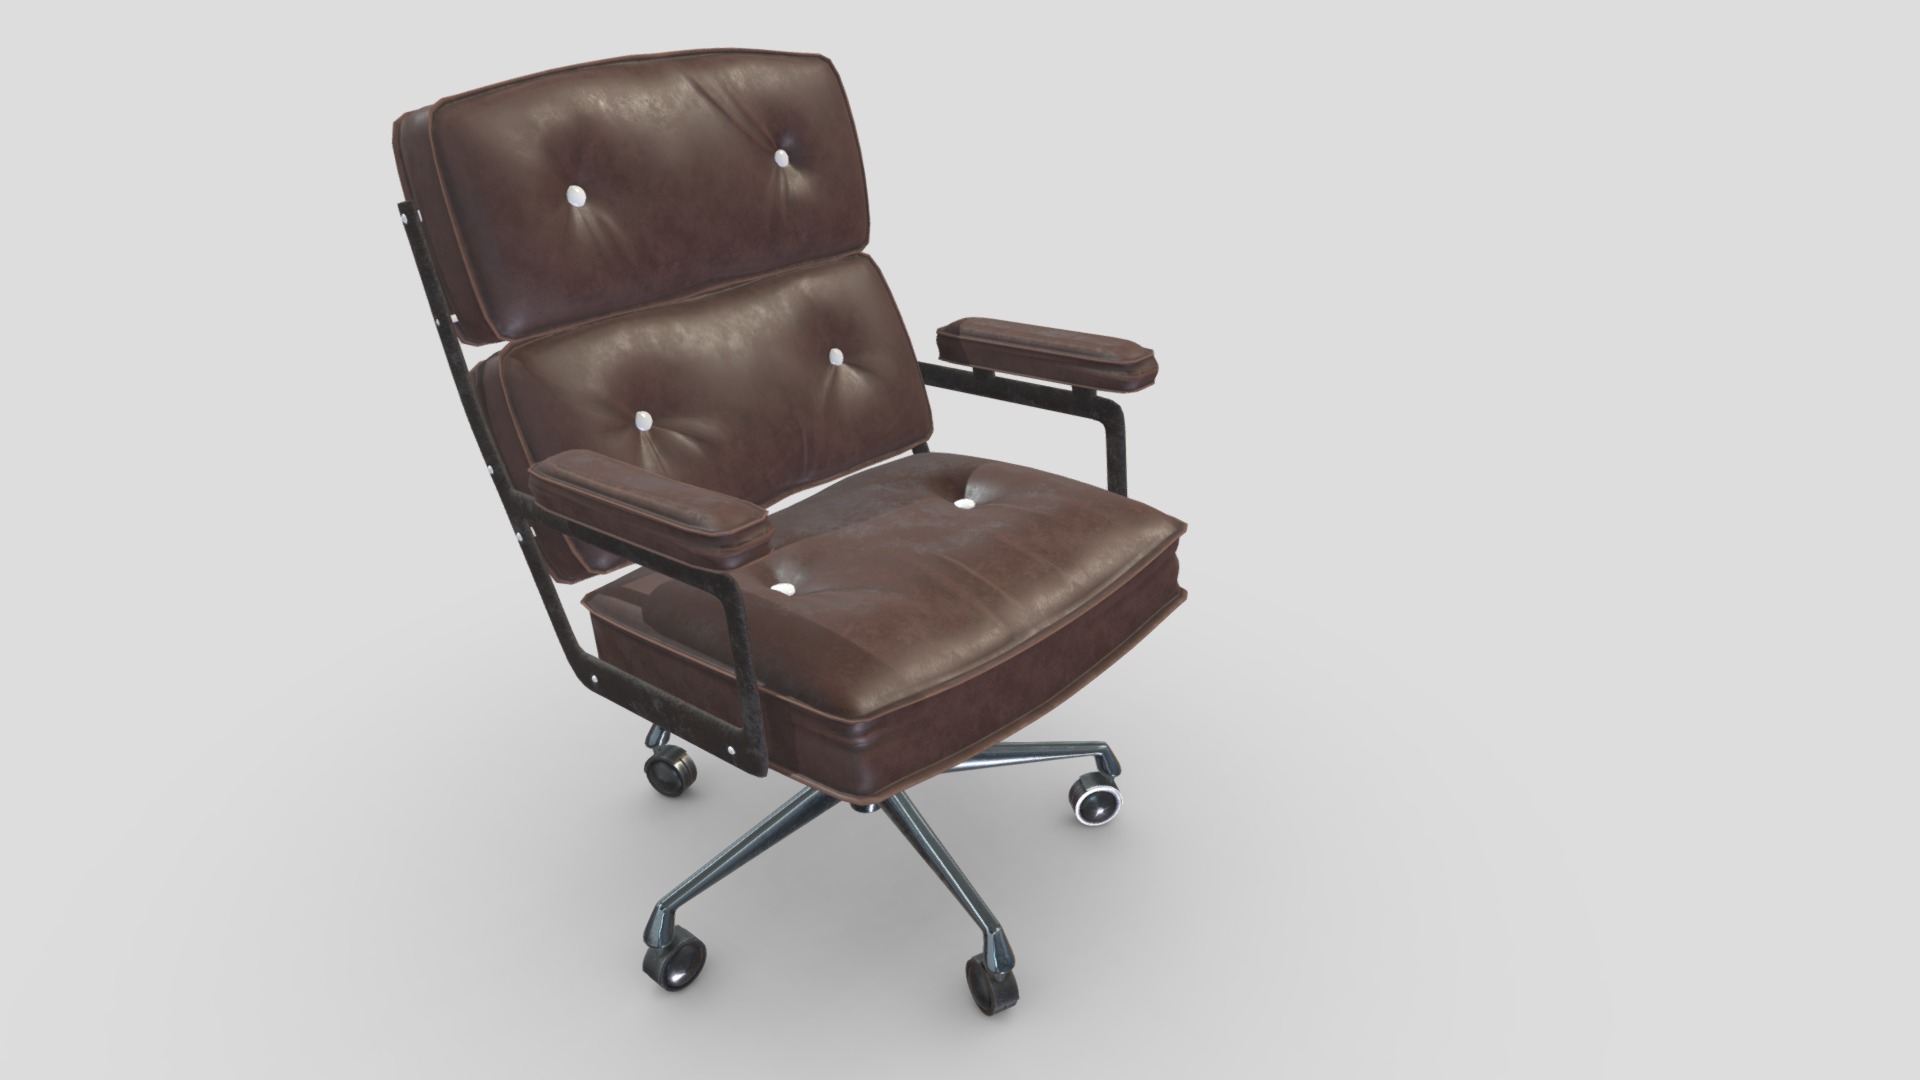 3D model Arm Chair 02 - This is a 3D model of the Arm Chair 02. The 3D model is about a brown office chair.